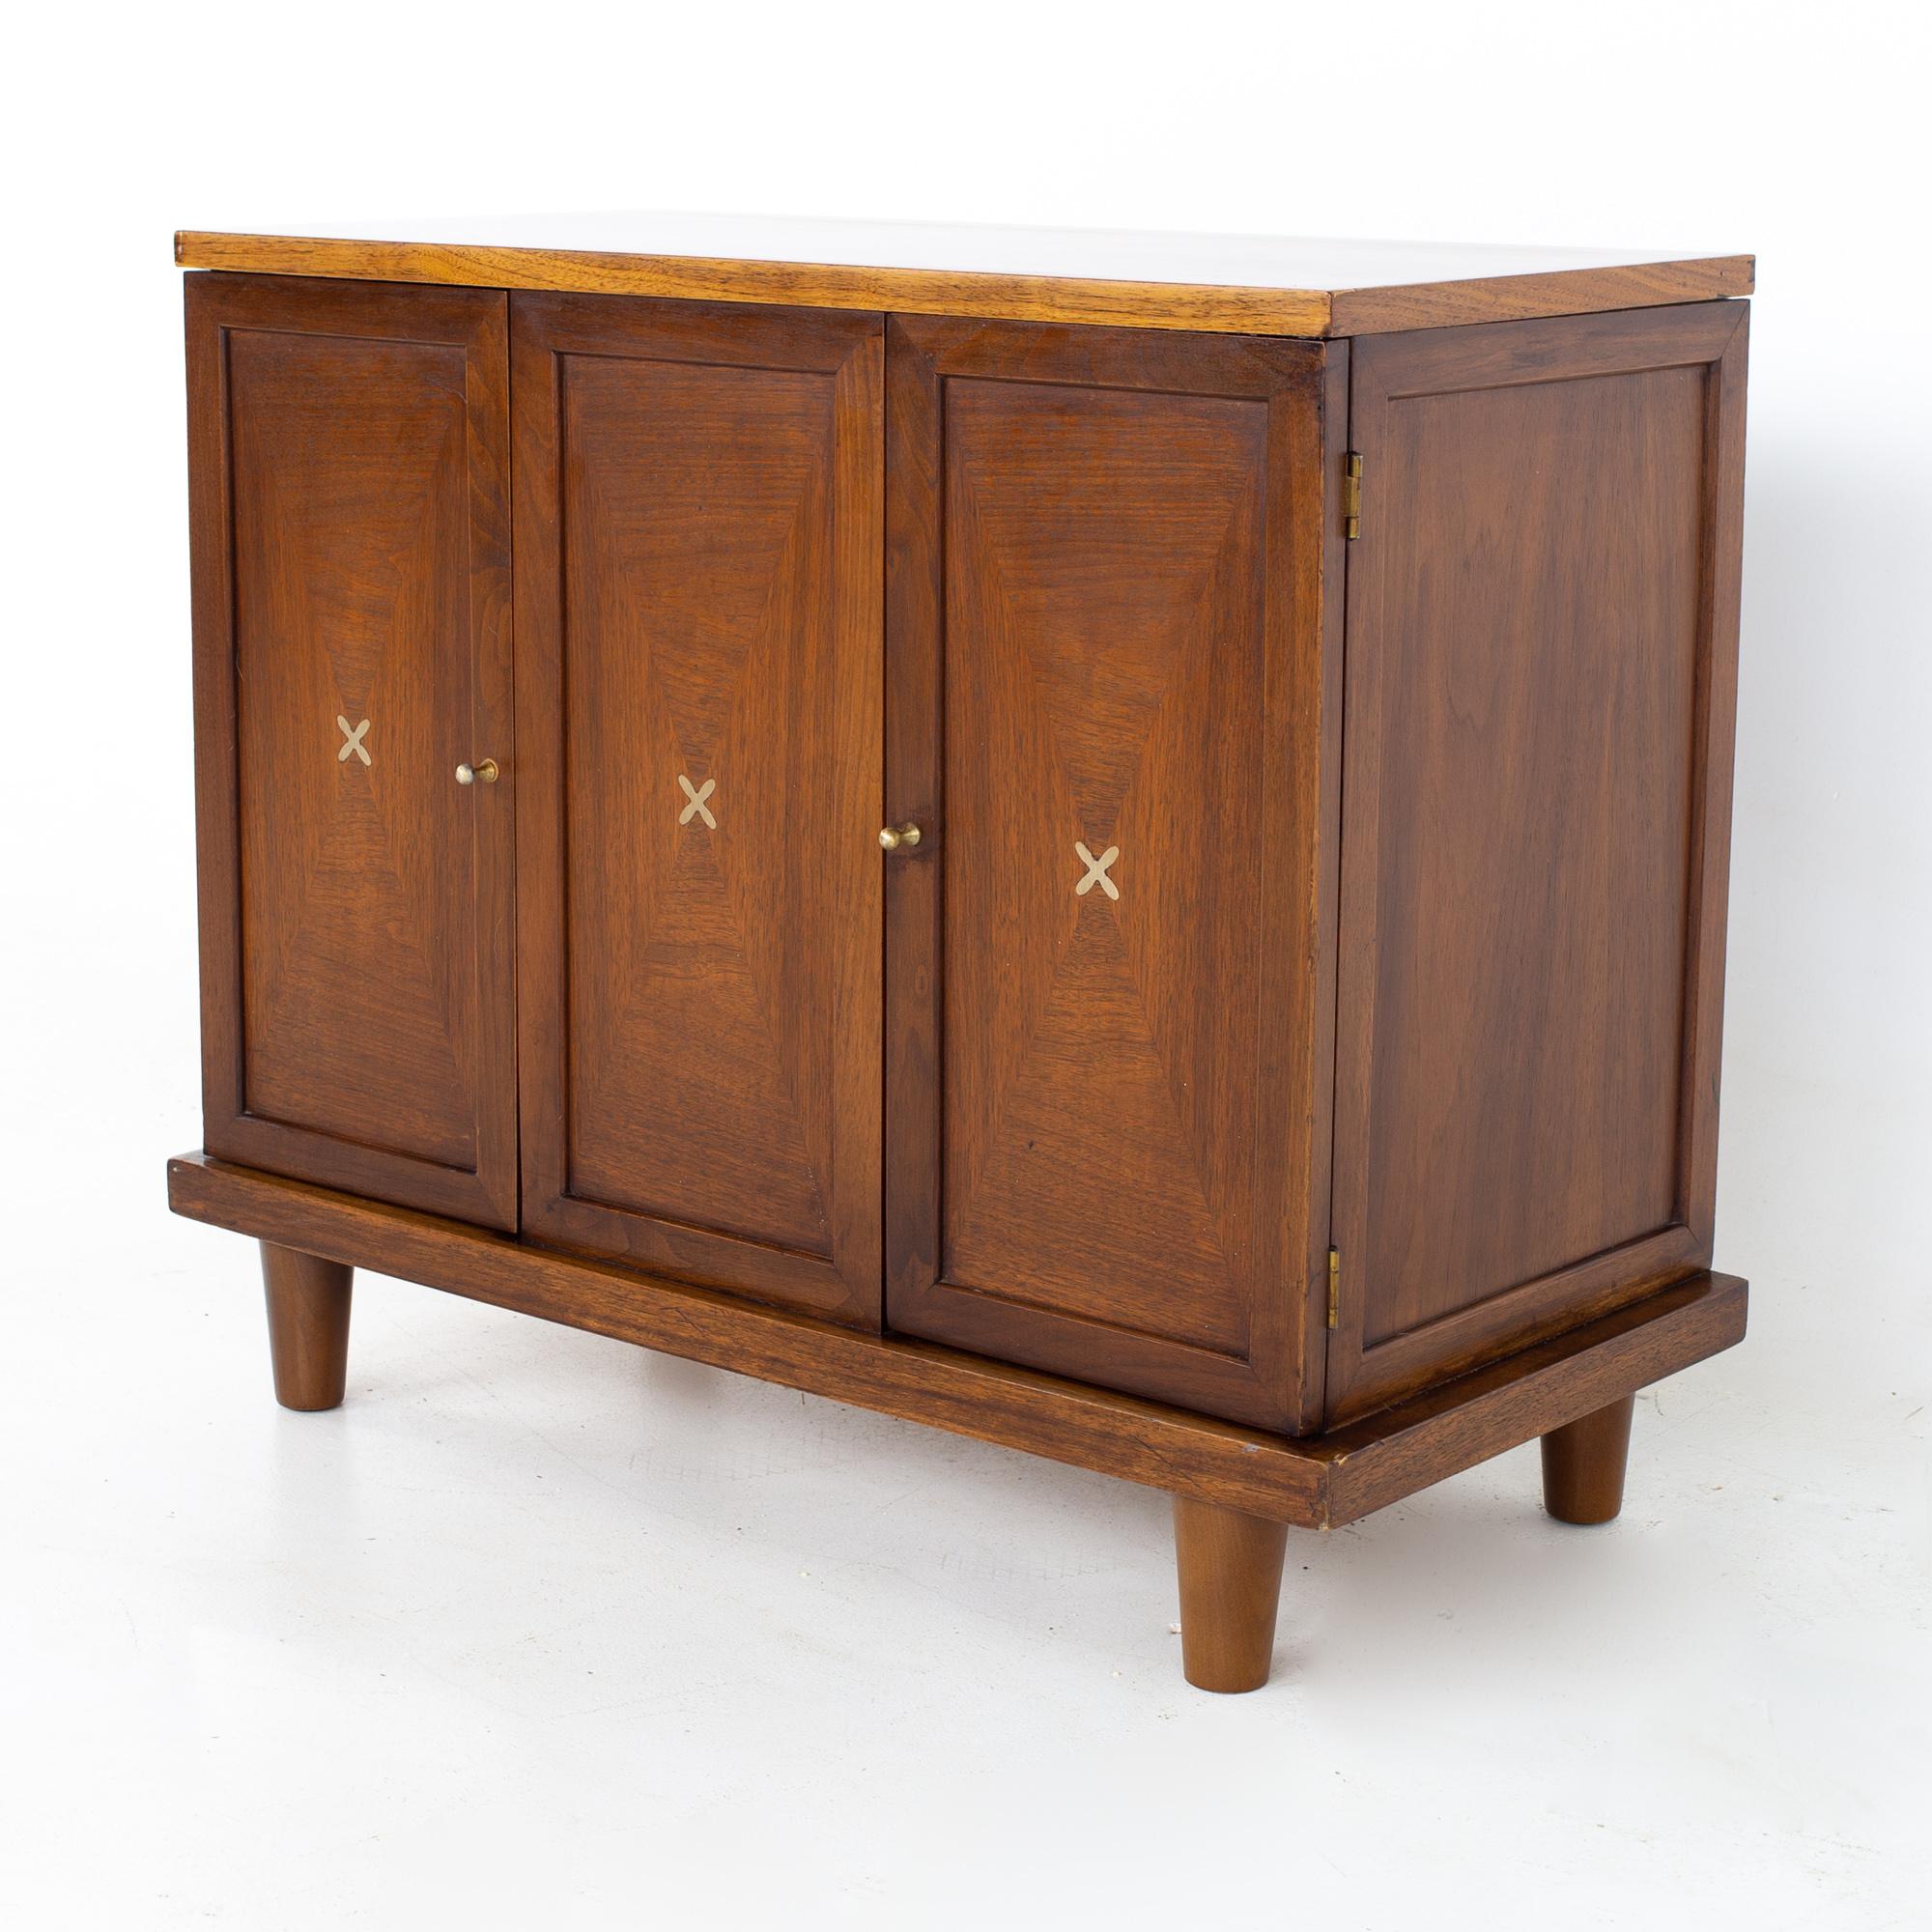 Merton Gershun for American of martinsville mid century walnut bar record credenza
Credenza measures: 30 wide x 14.5 deep x 26 inches high

All pieces of furniture can be had in what we call restored vintage condition. That means the piece is